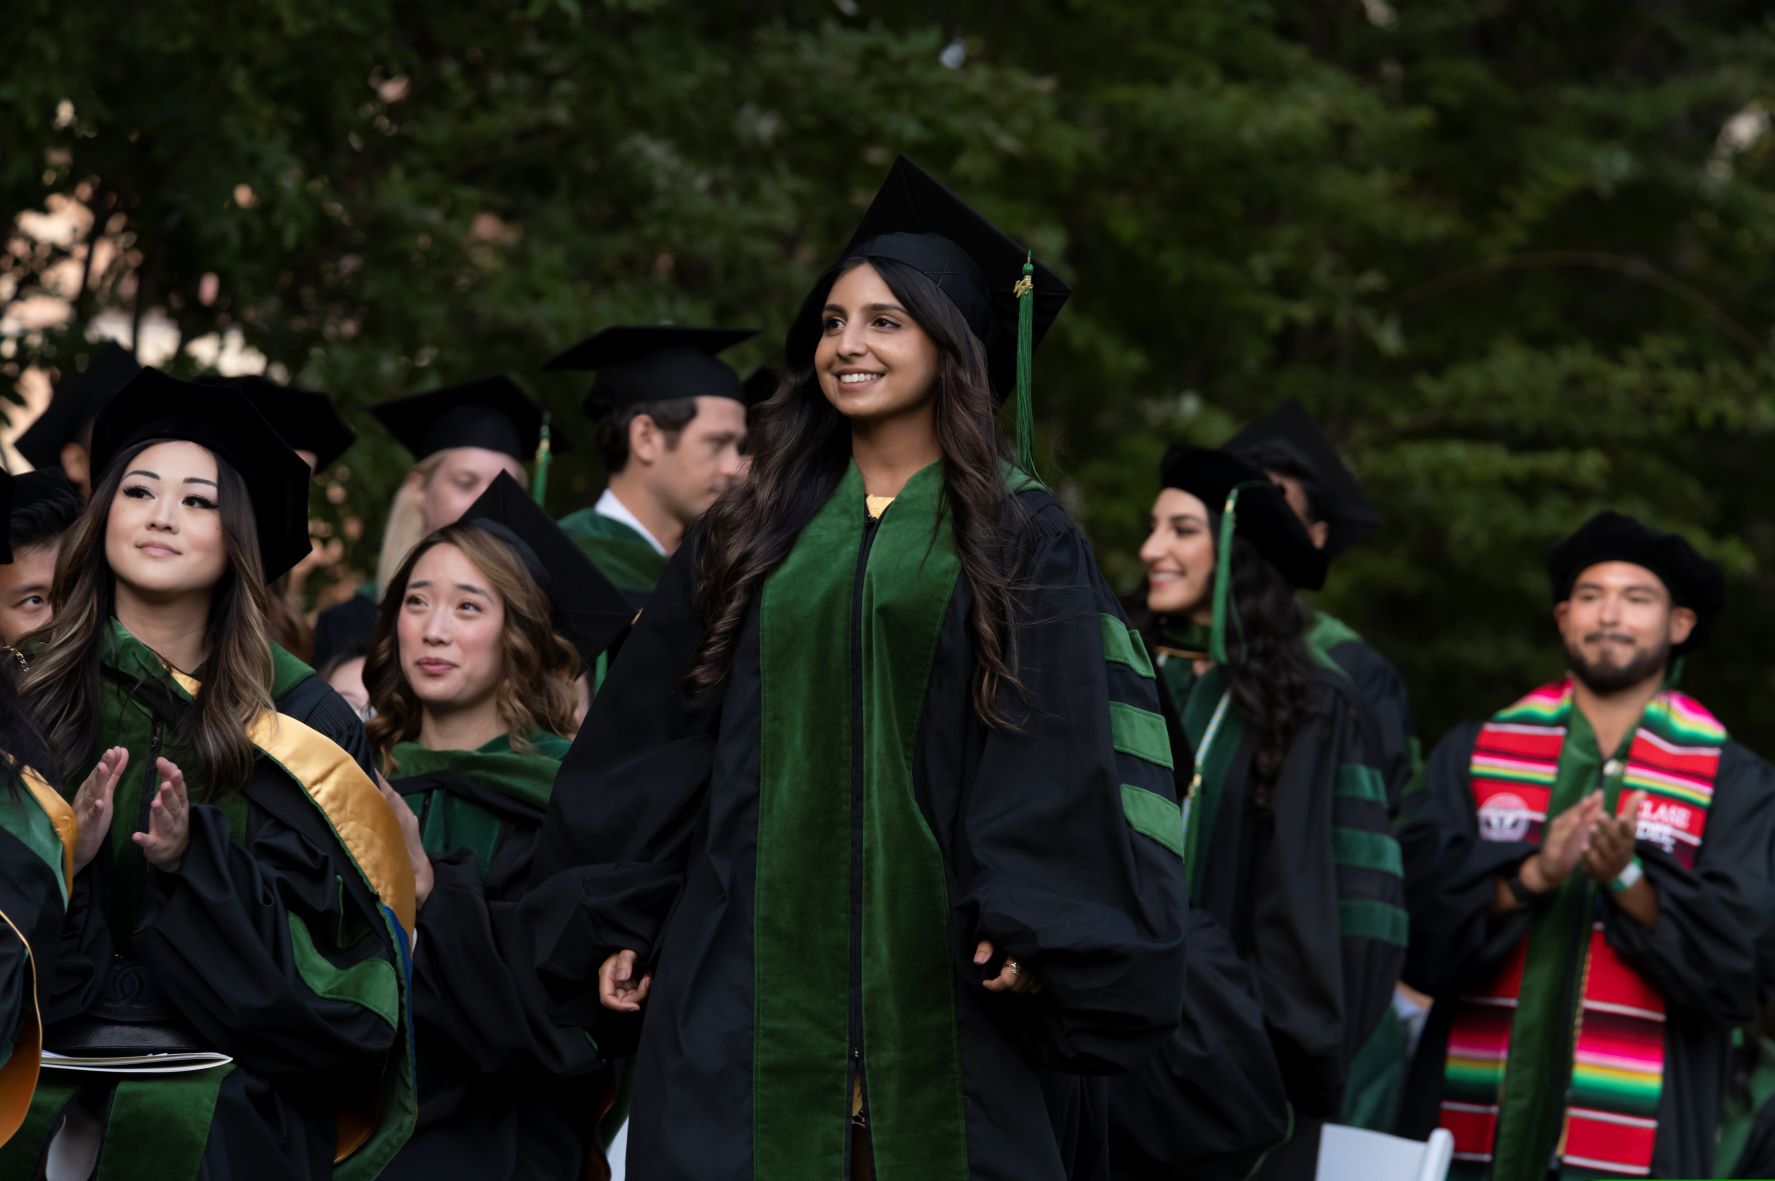 Female medical student graduate walks during commencement ceremony 2022